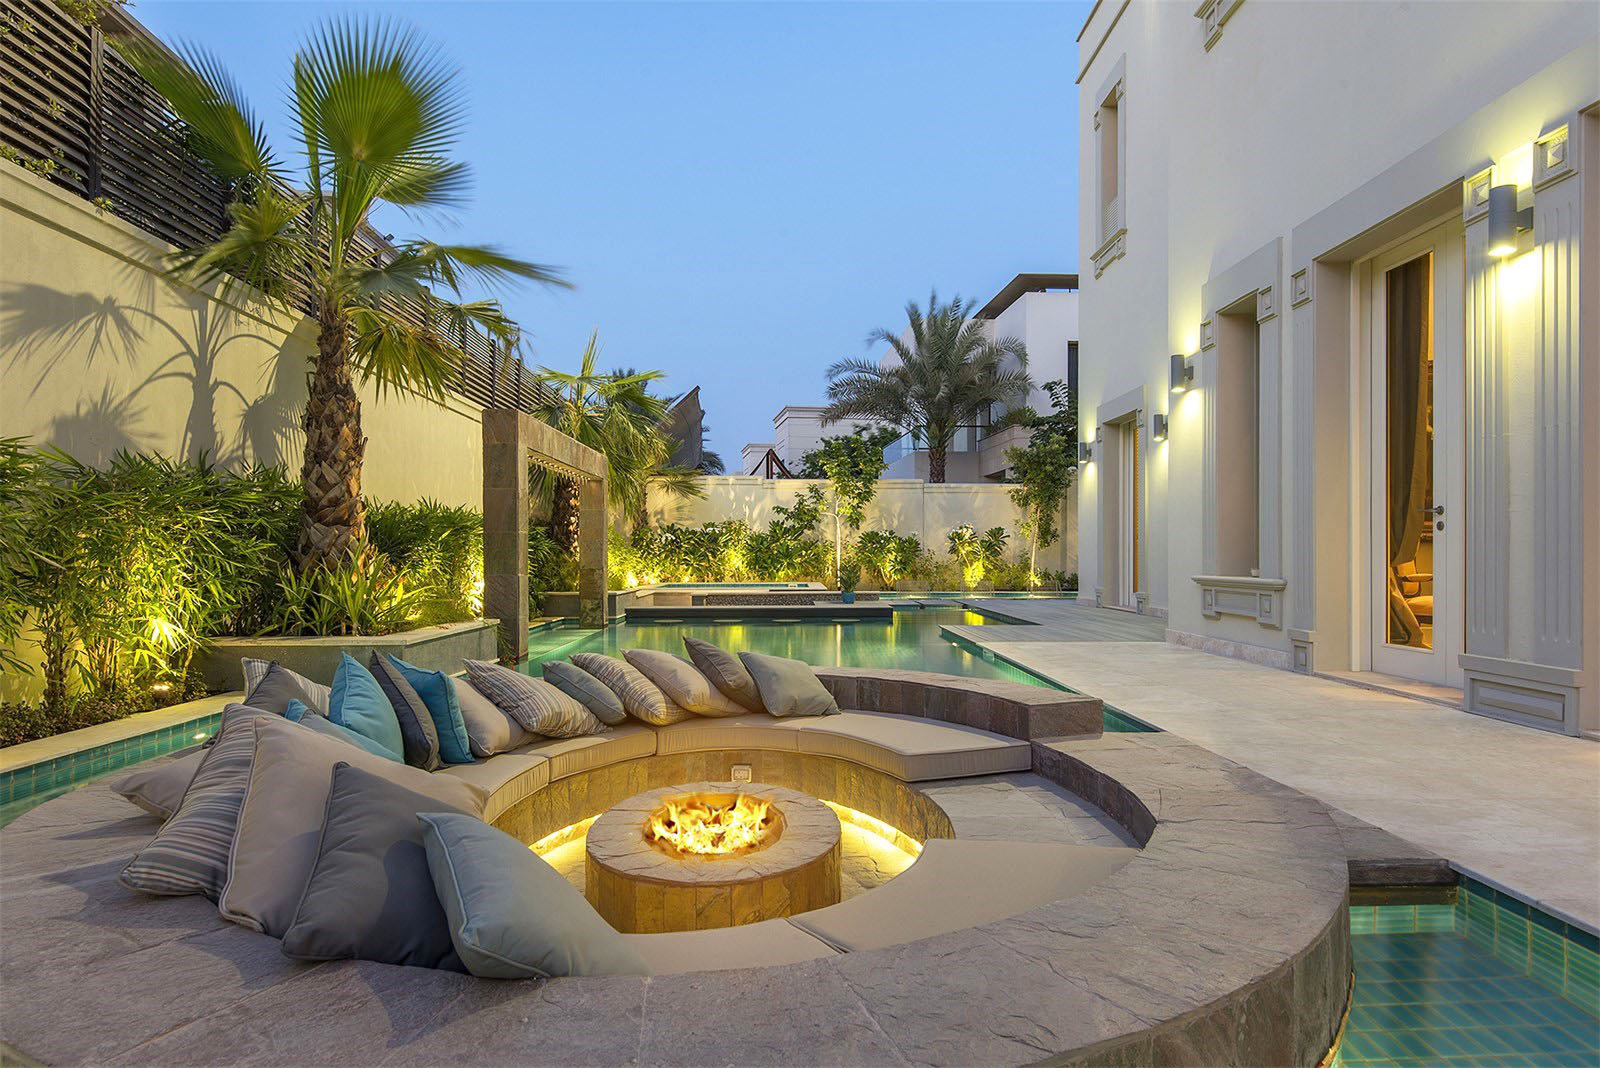 Unique patio idea featuring a fire pit in the middle of a pool.